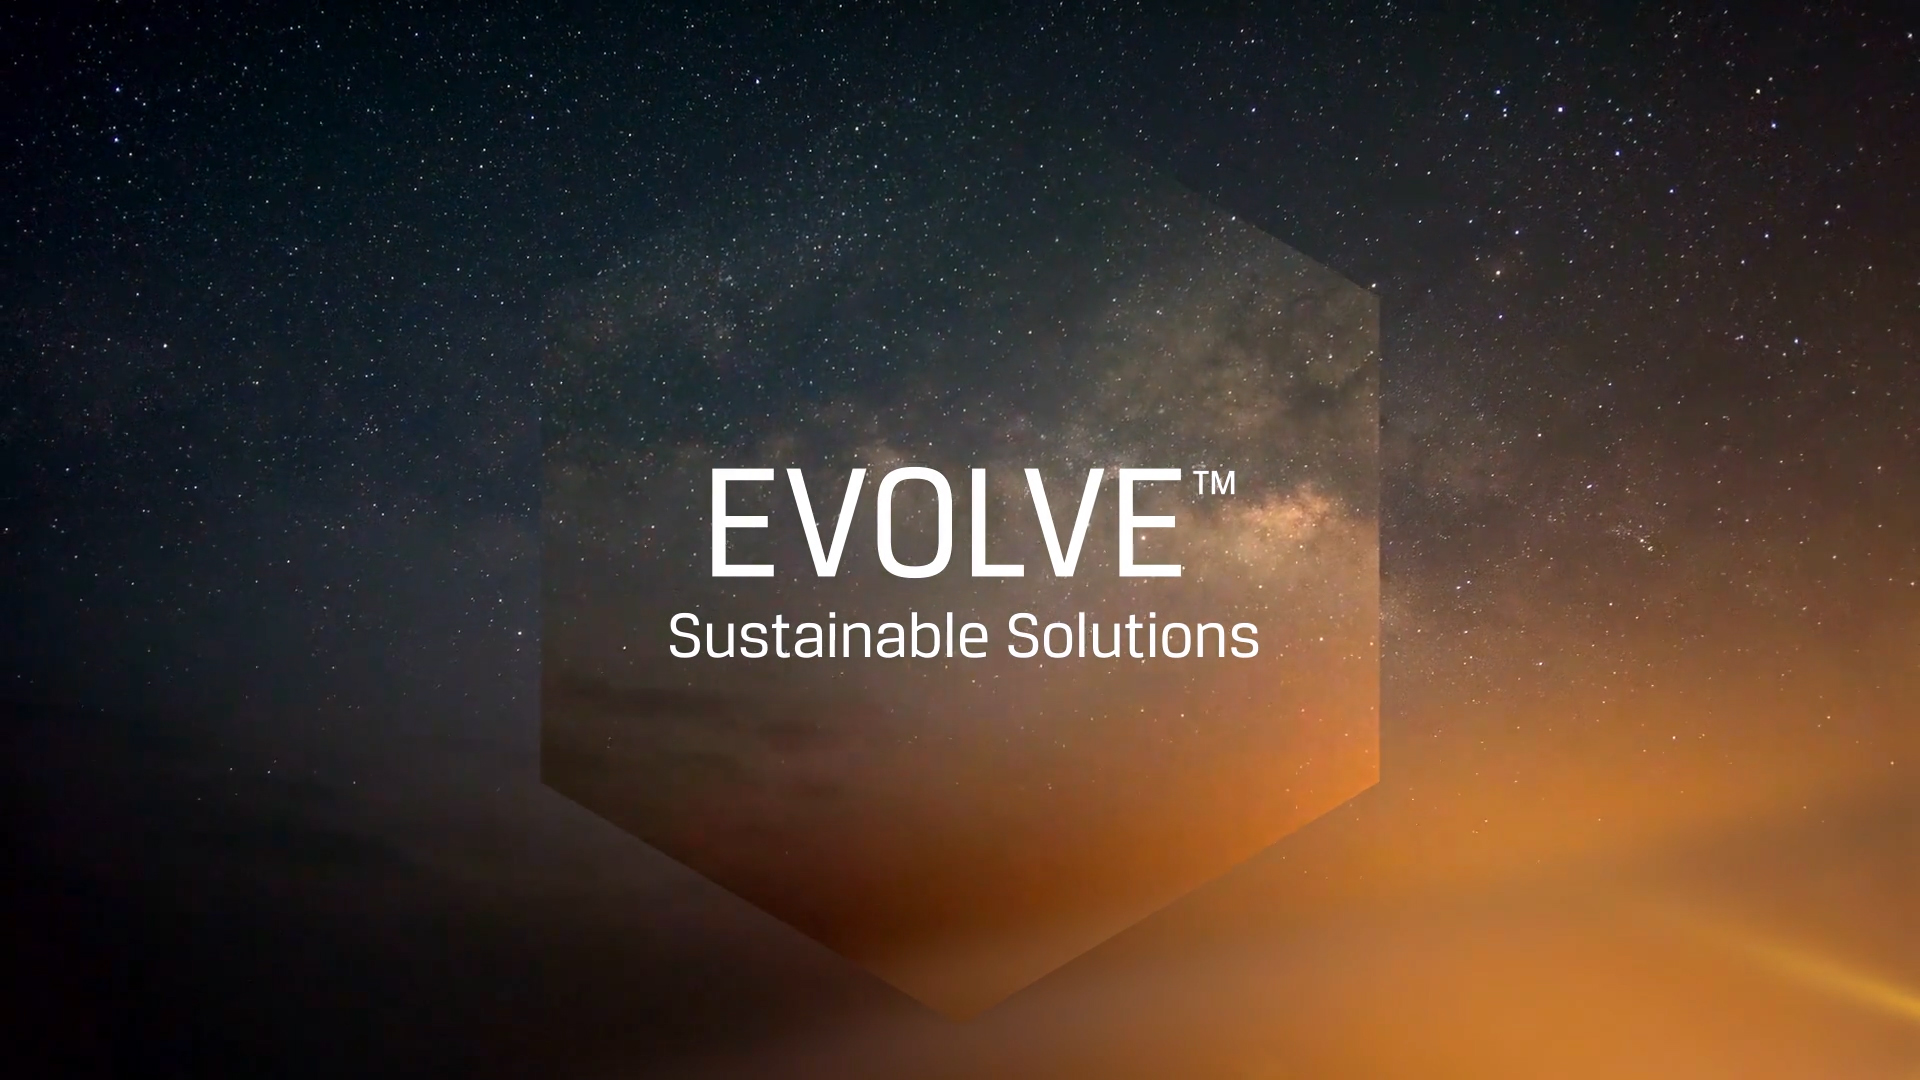 Stars at night with the text "Evolve sustainable solutions" in the middle